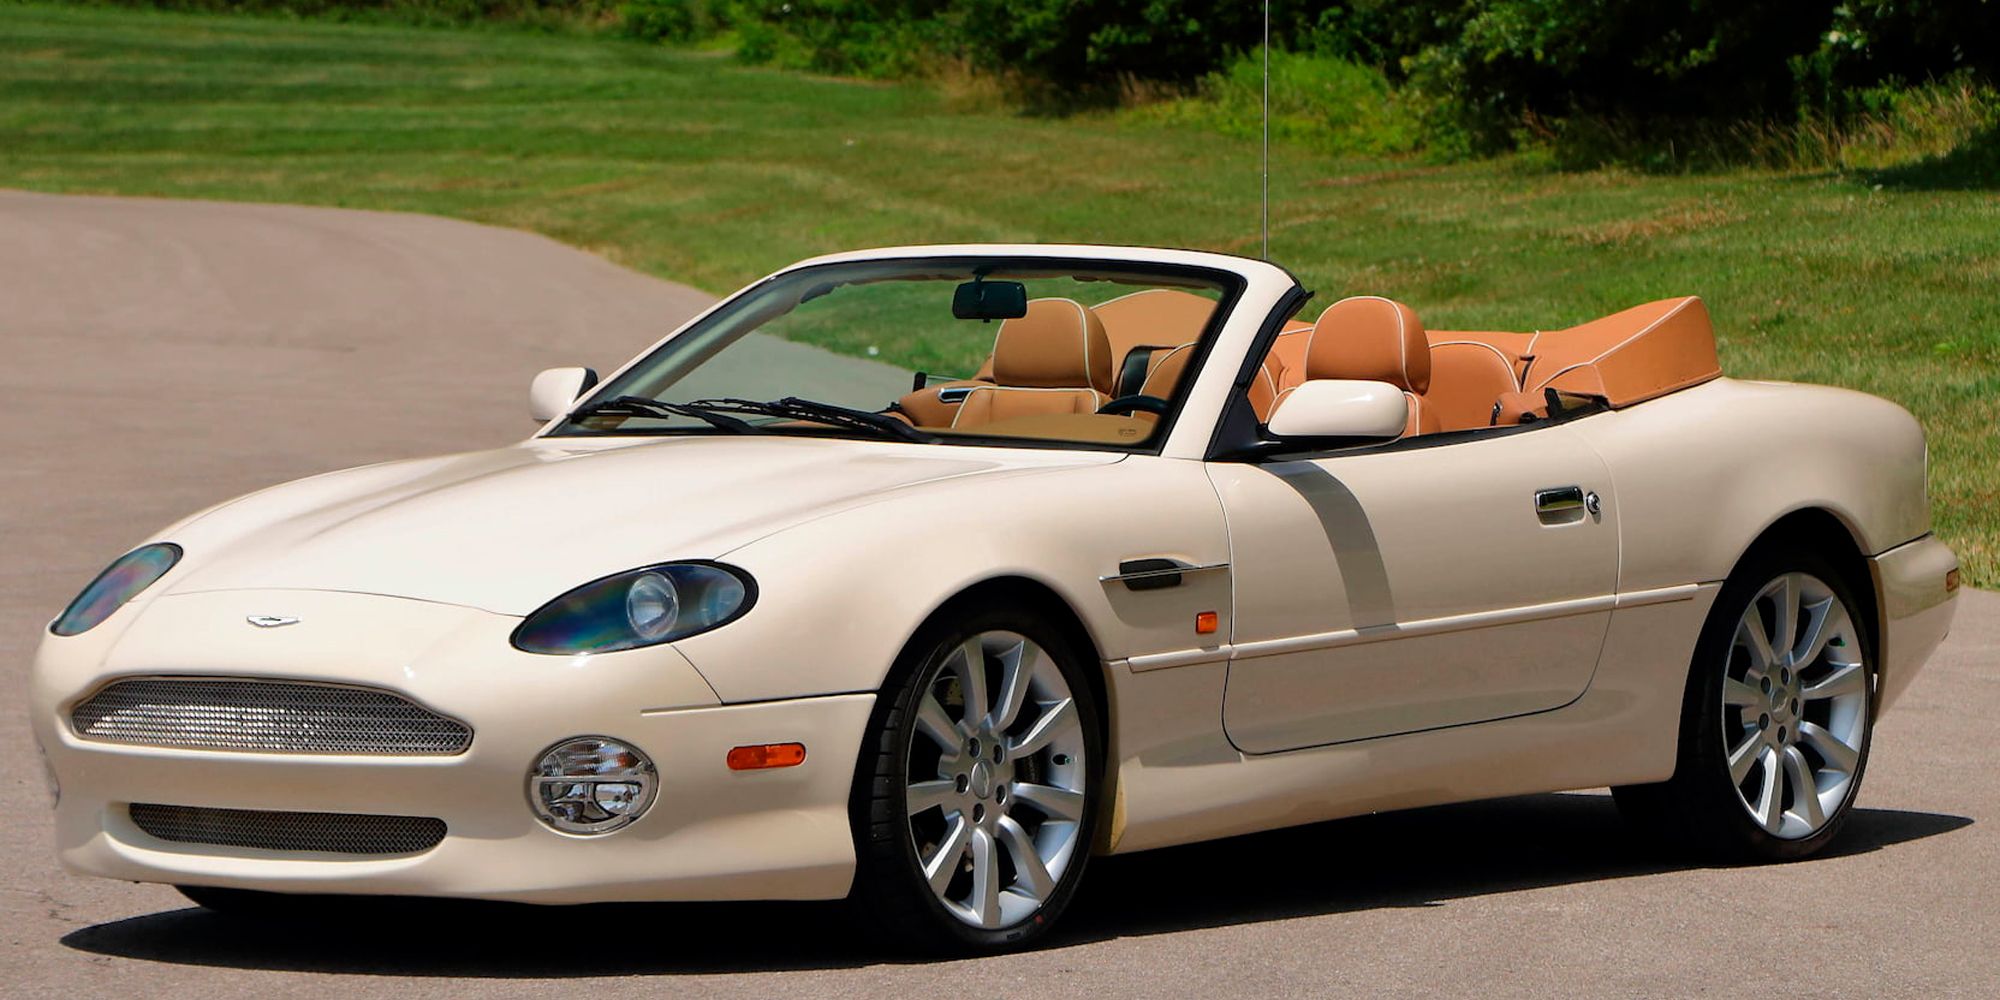 The front of a DB7 Vantage Convertible